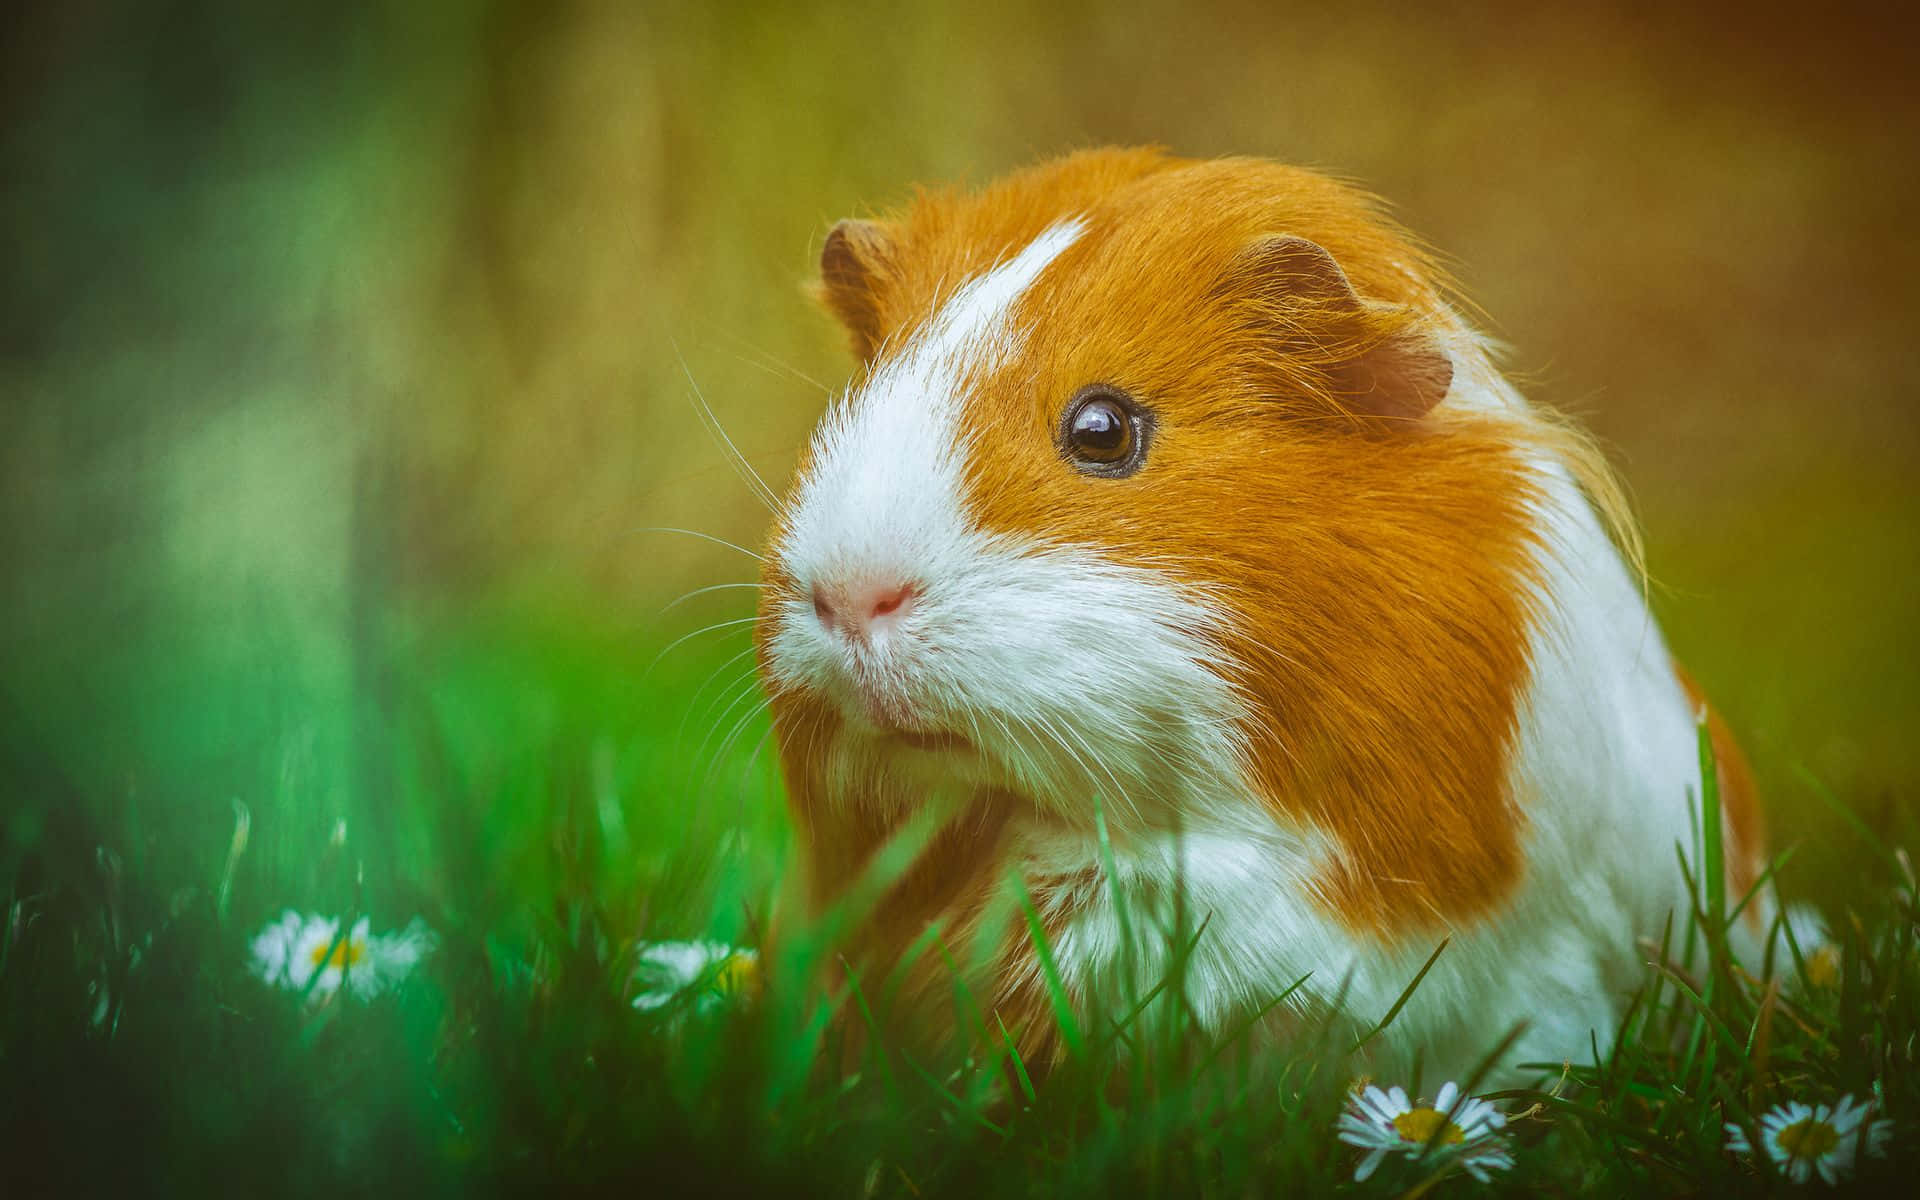 Cute Guinea Pig Outdoor Grass Photography Pictures